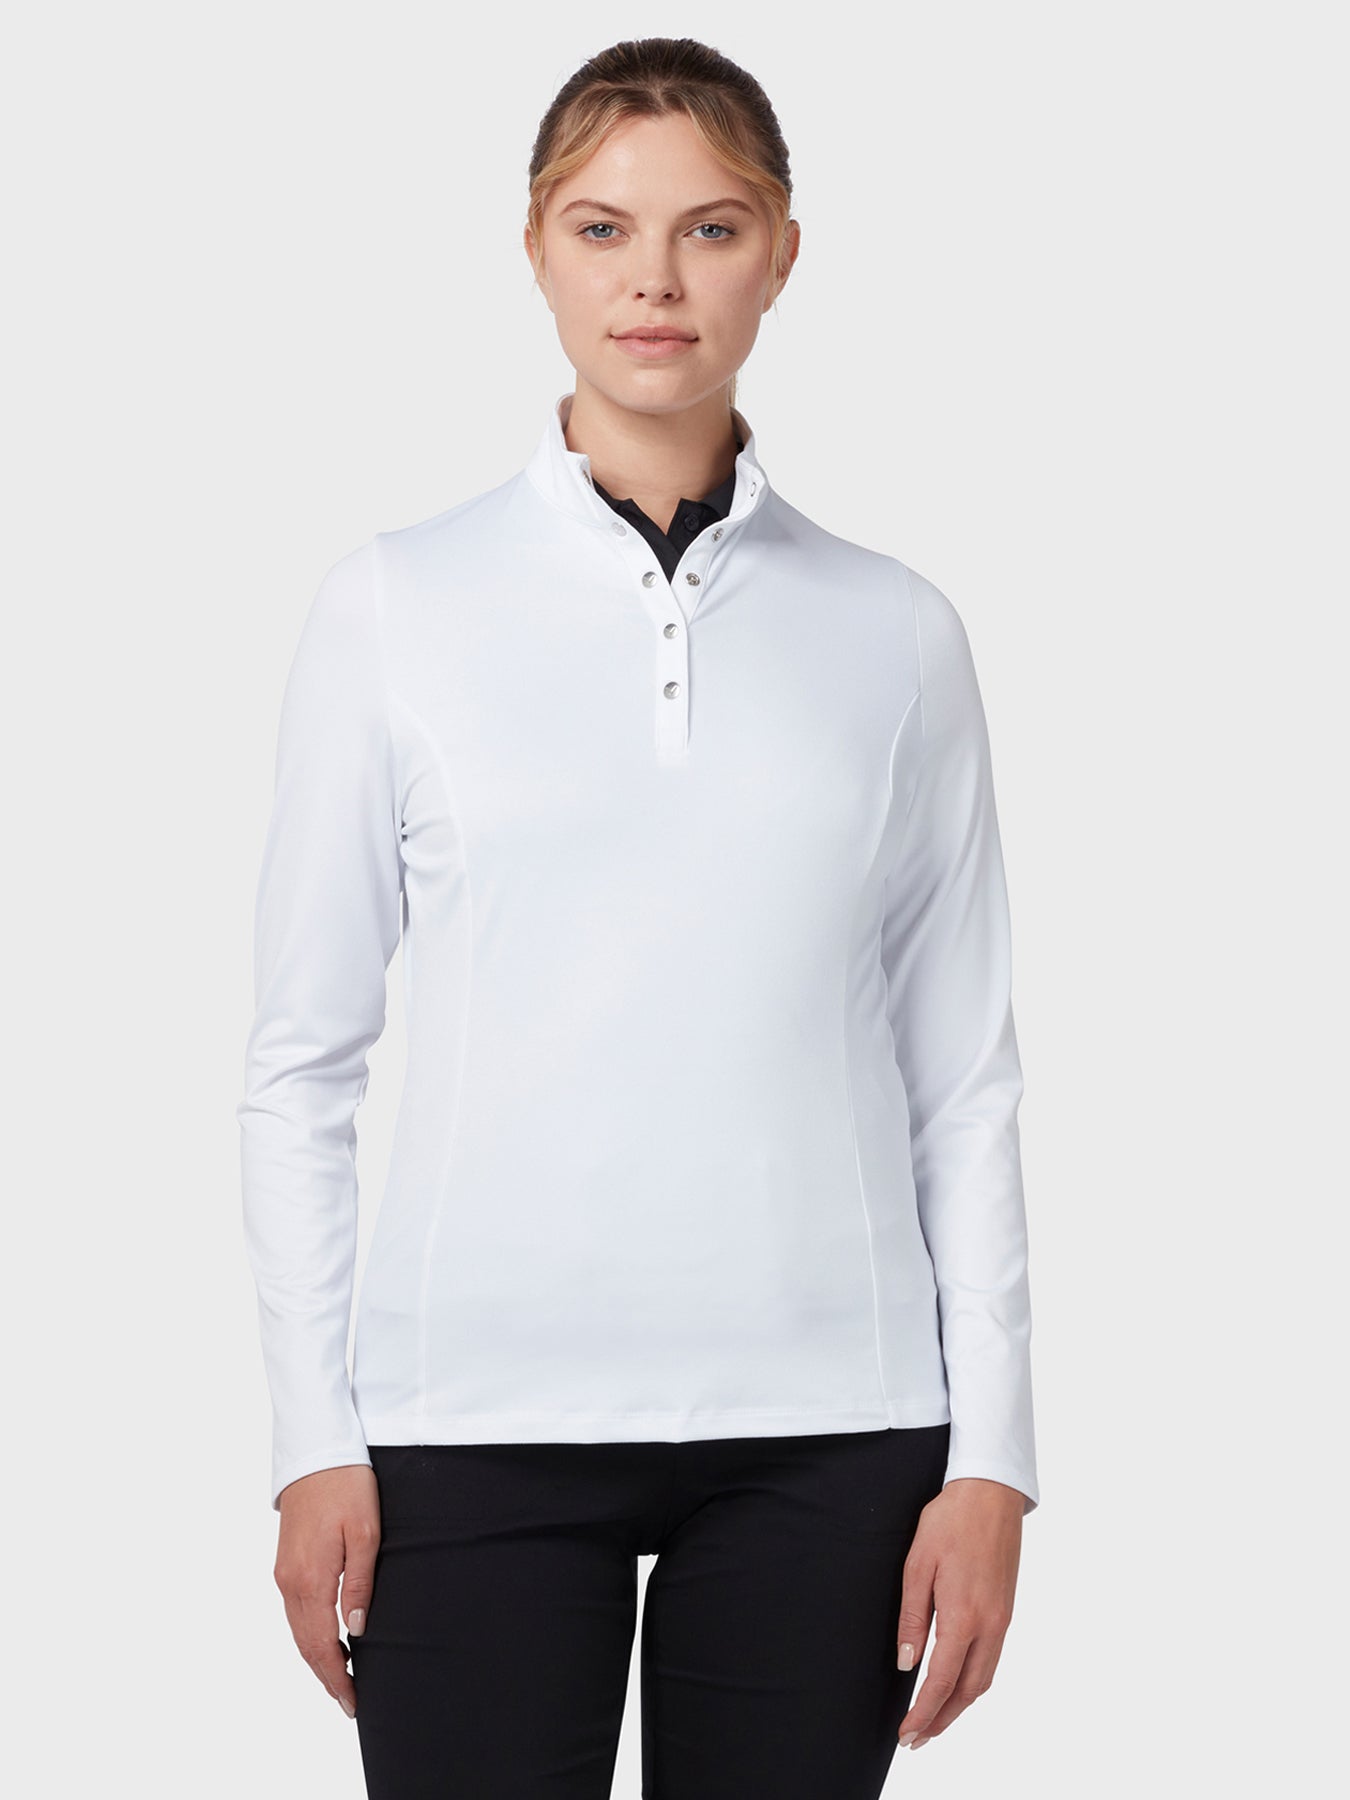 View Womens Thermal Longsleeve Fleece Back Jersey Polo In Brilliant White Brilliant White M information